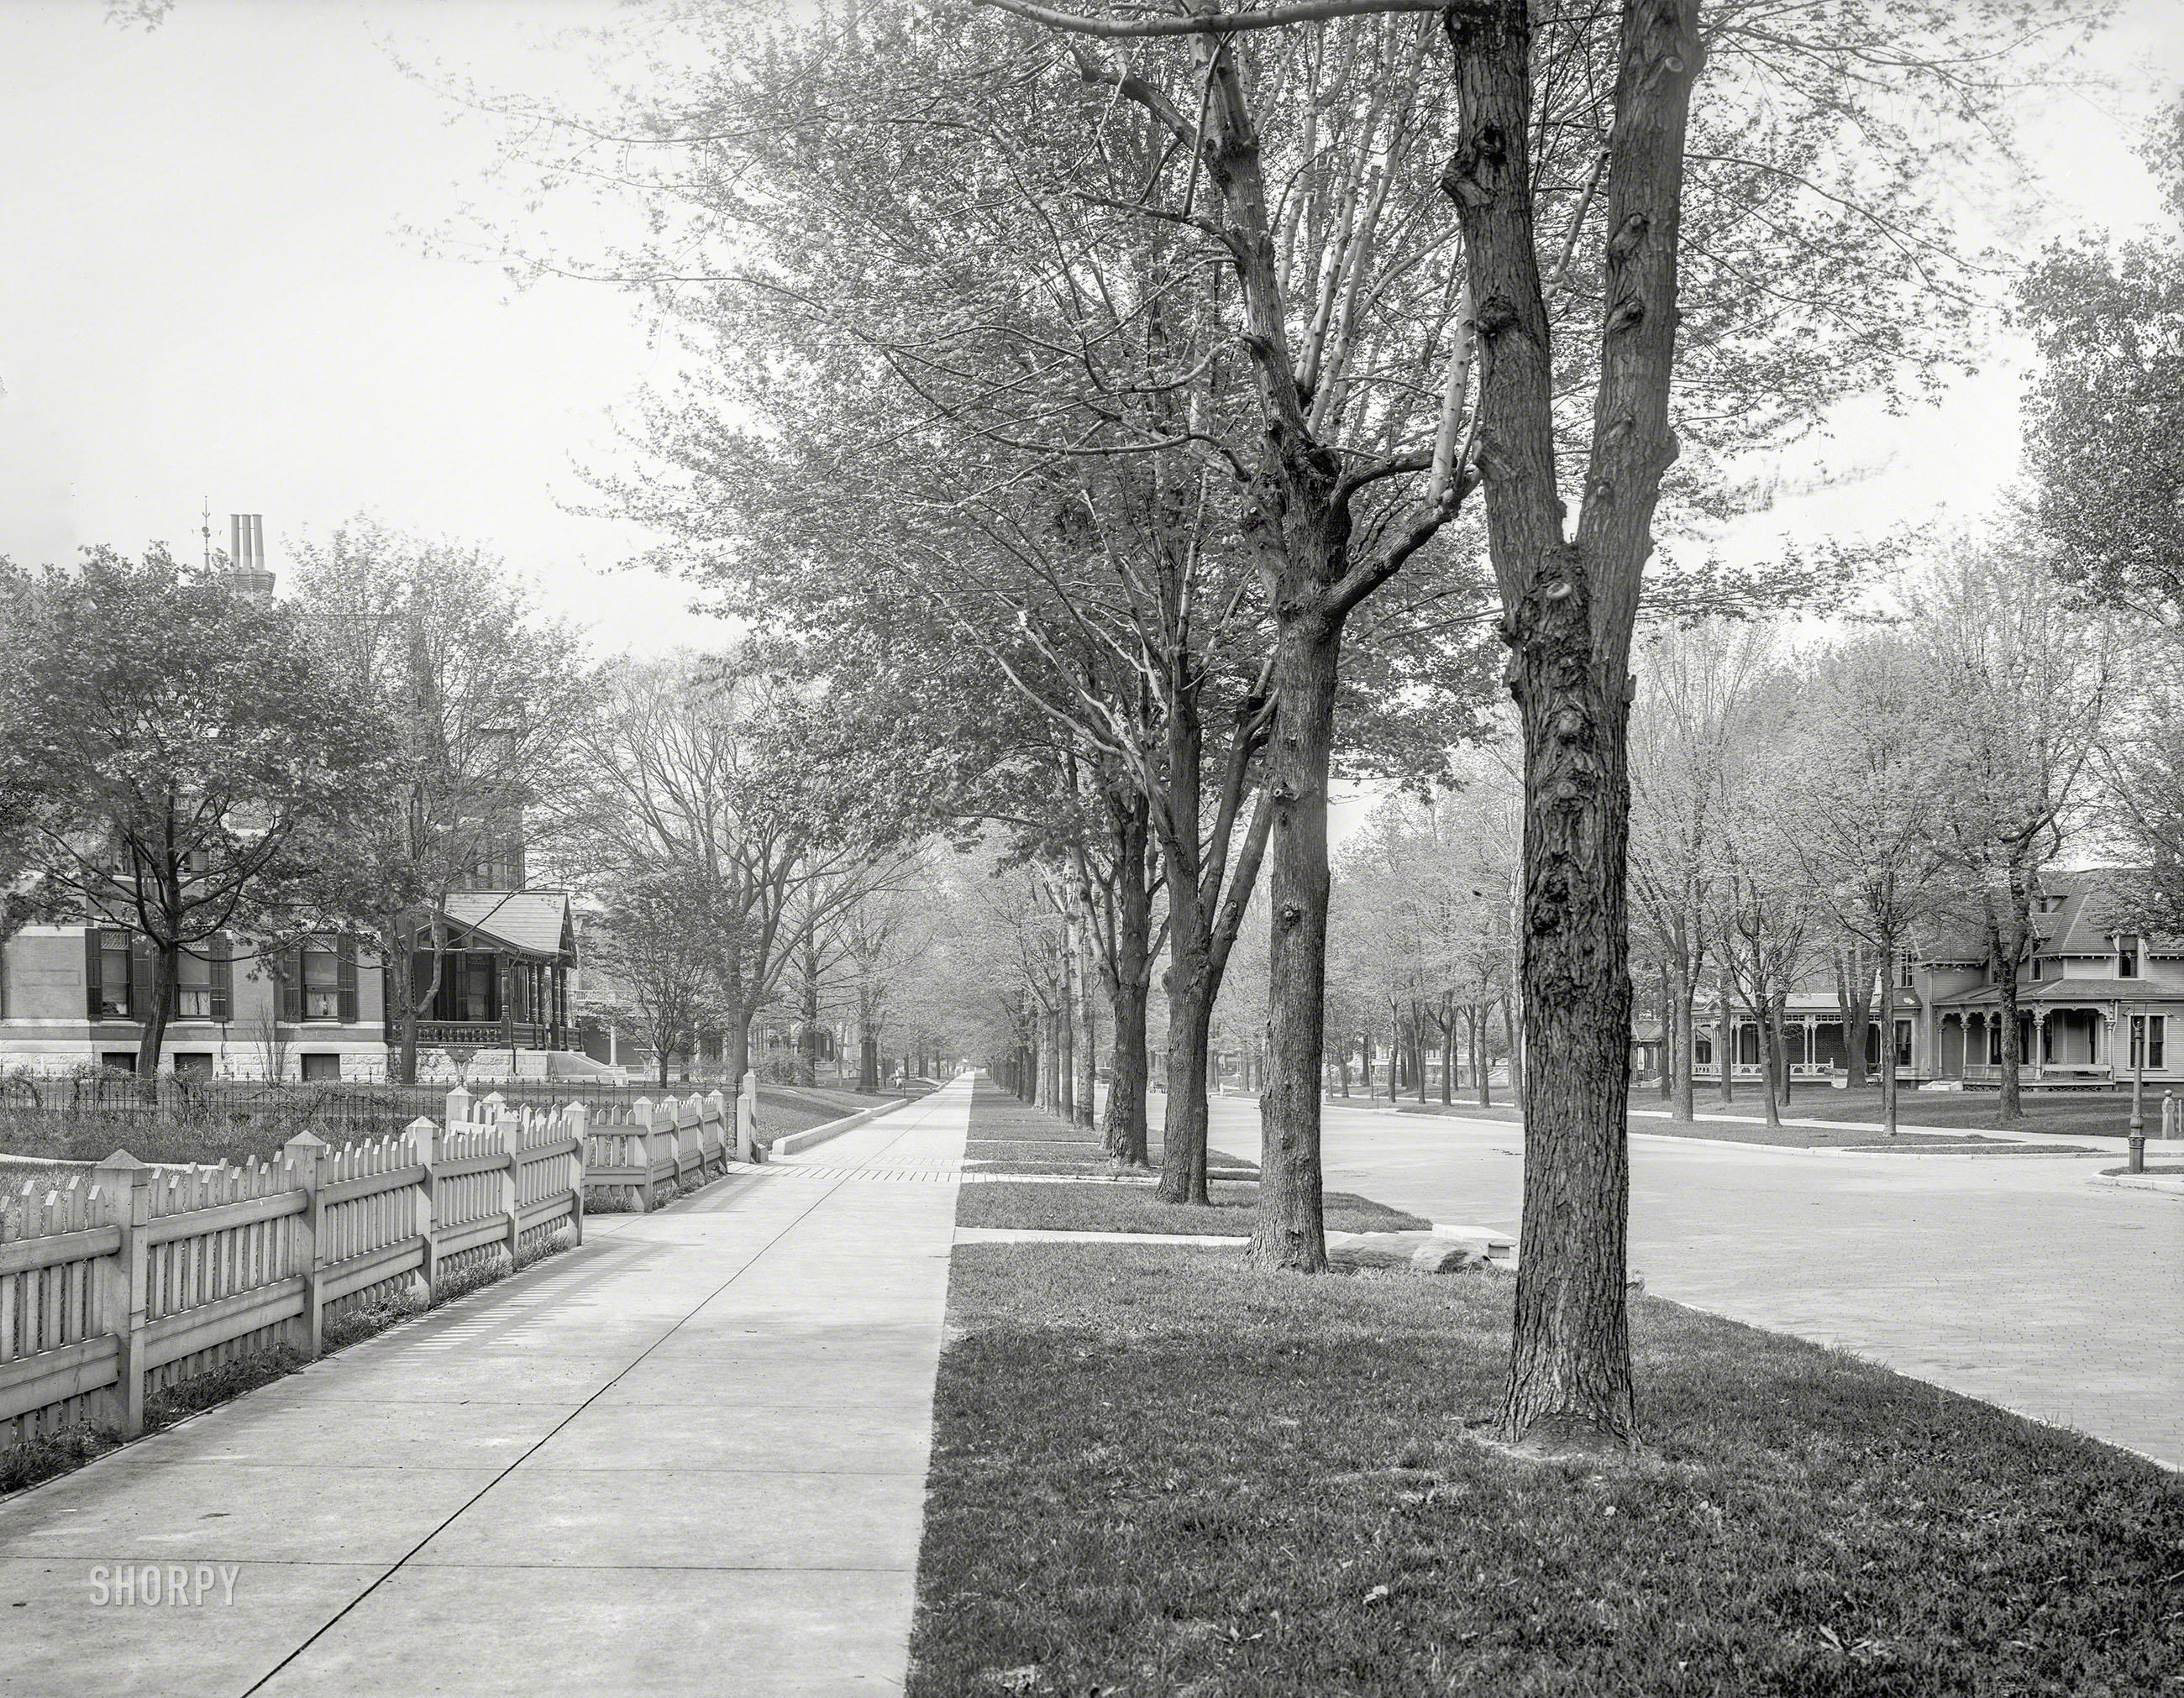 Indianapolis circa 1904. "North Delaware Street." Our third visit to this leafy enclave. 8x10 inch glass negative, Detroit Photographic Co. View full size.